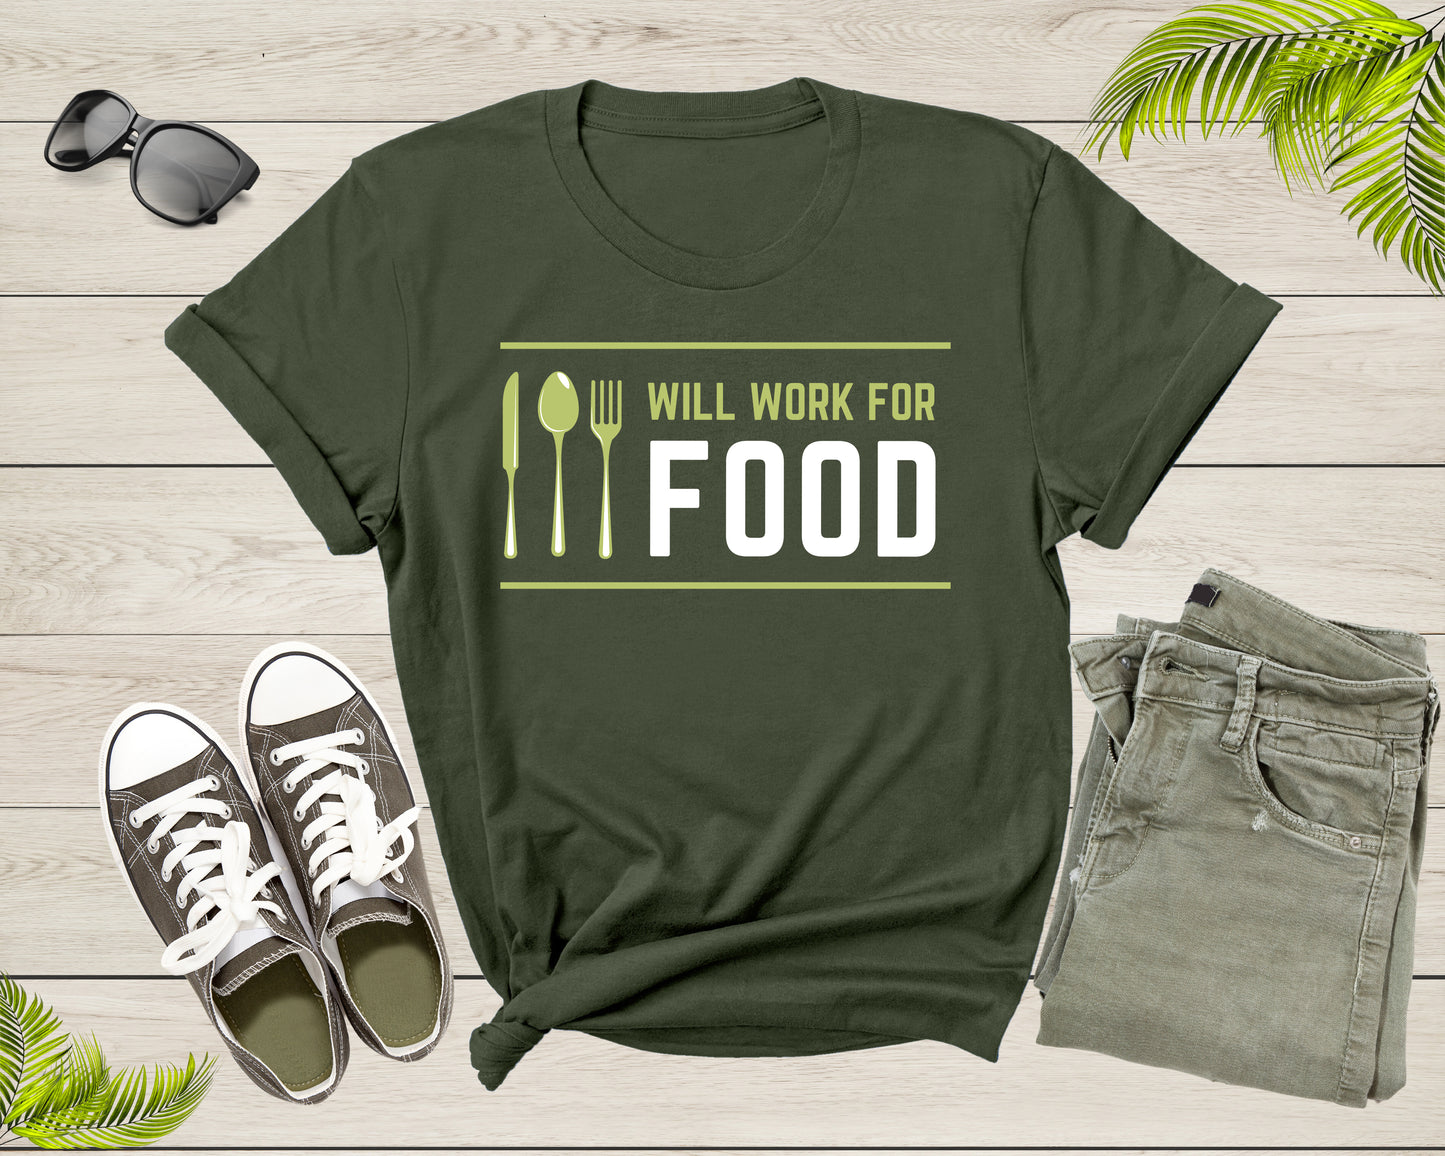 I Will Work for Food Funny Food Lover Sarcastic Hungry T-Shirt Foodie Food Lover Gift T Shirt for Men Women Kids Boys Girls Teens Tshirt